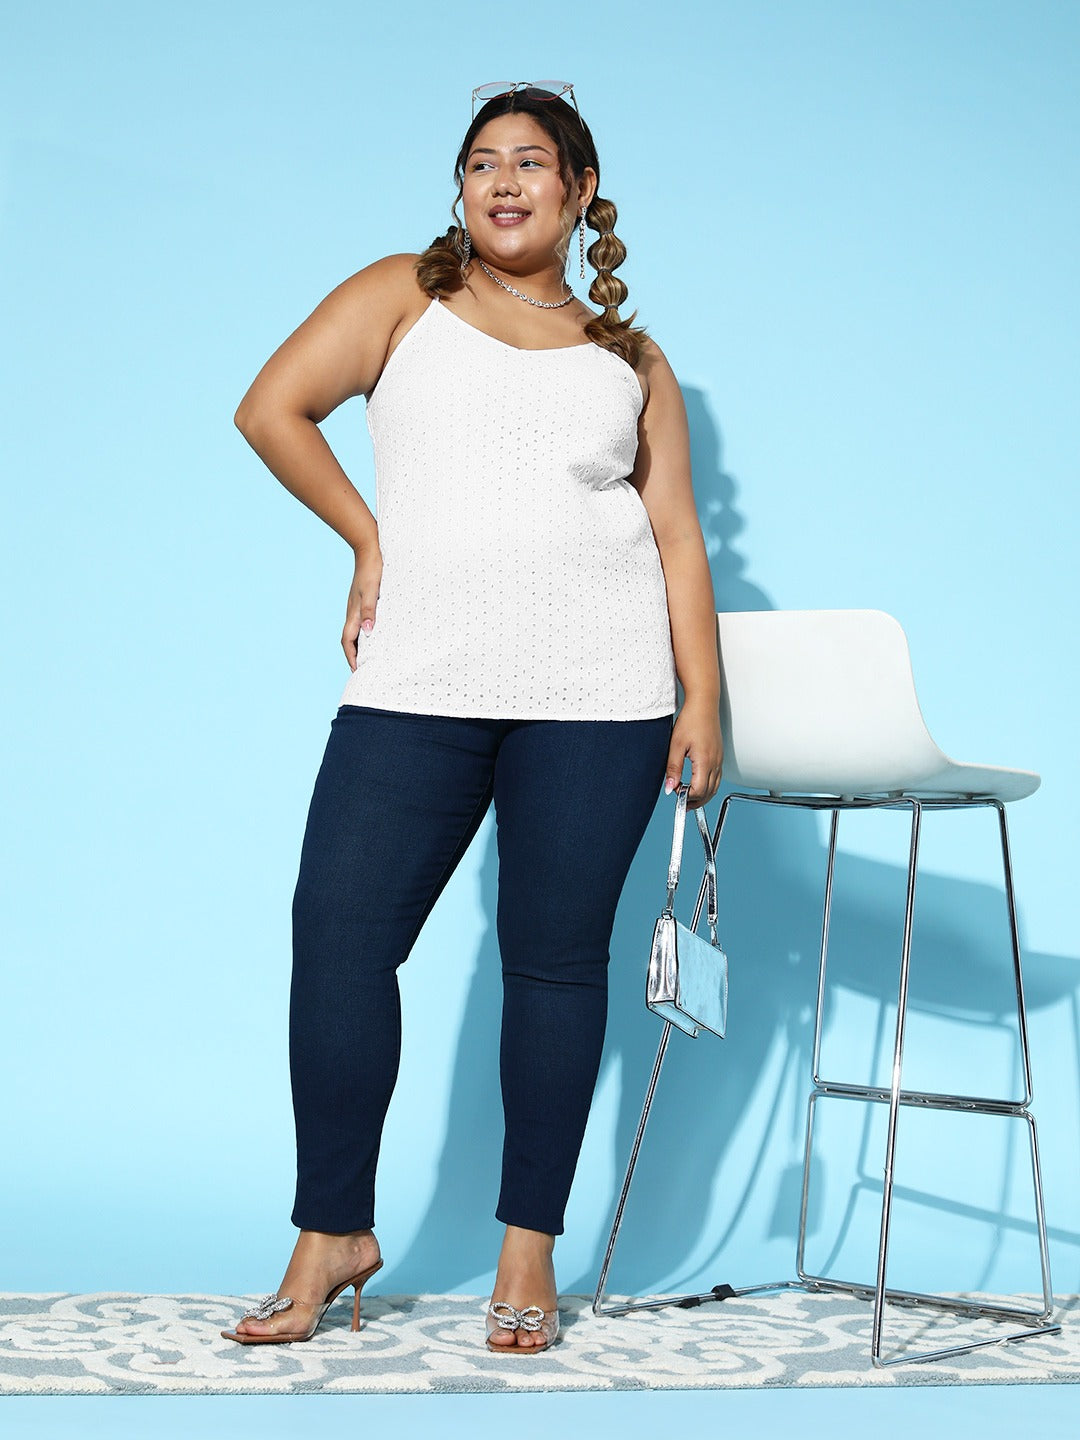 5 Of The Most Popular Plus Size Models